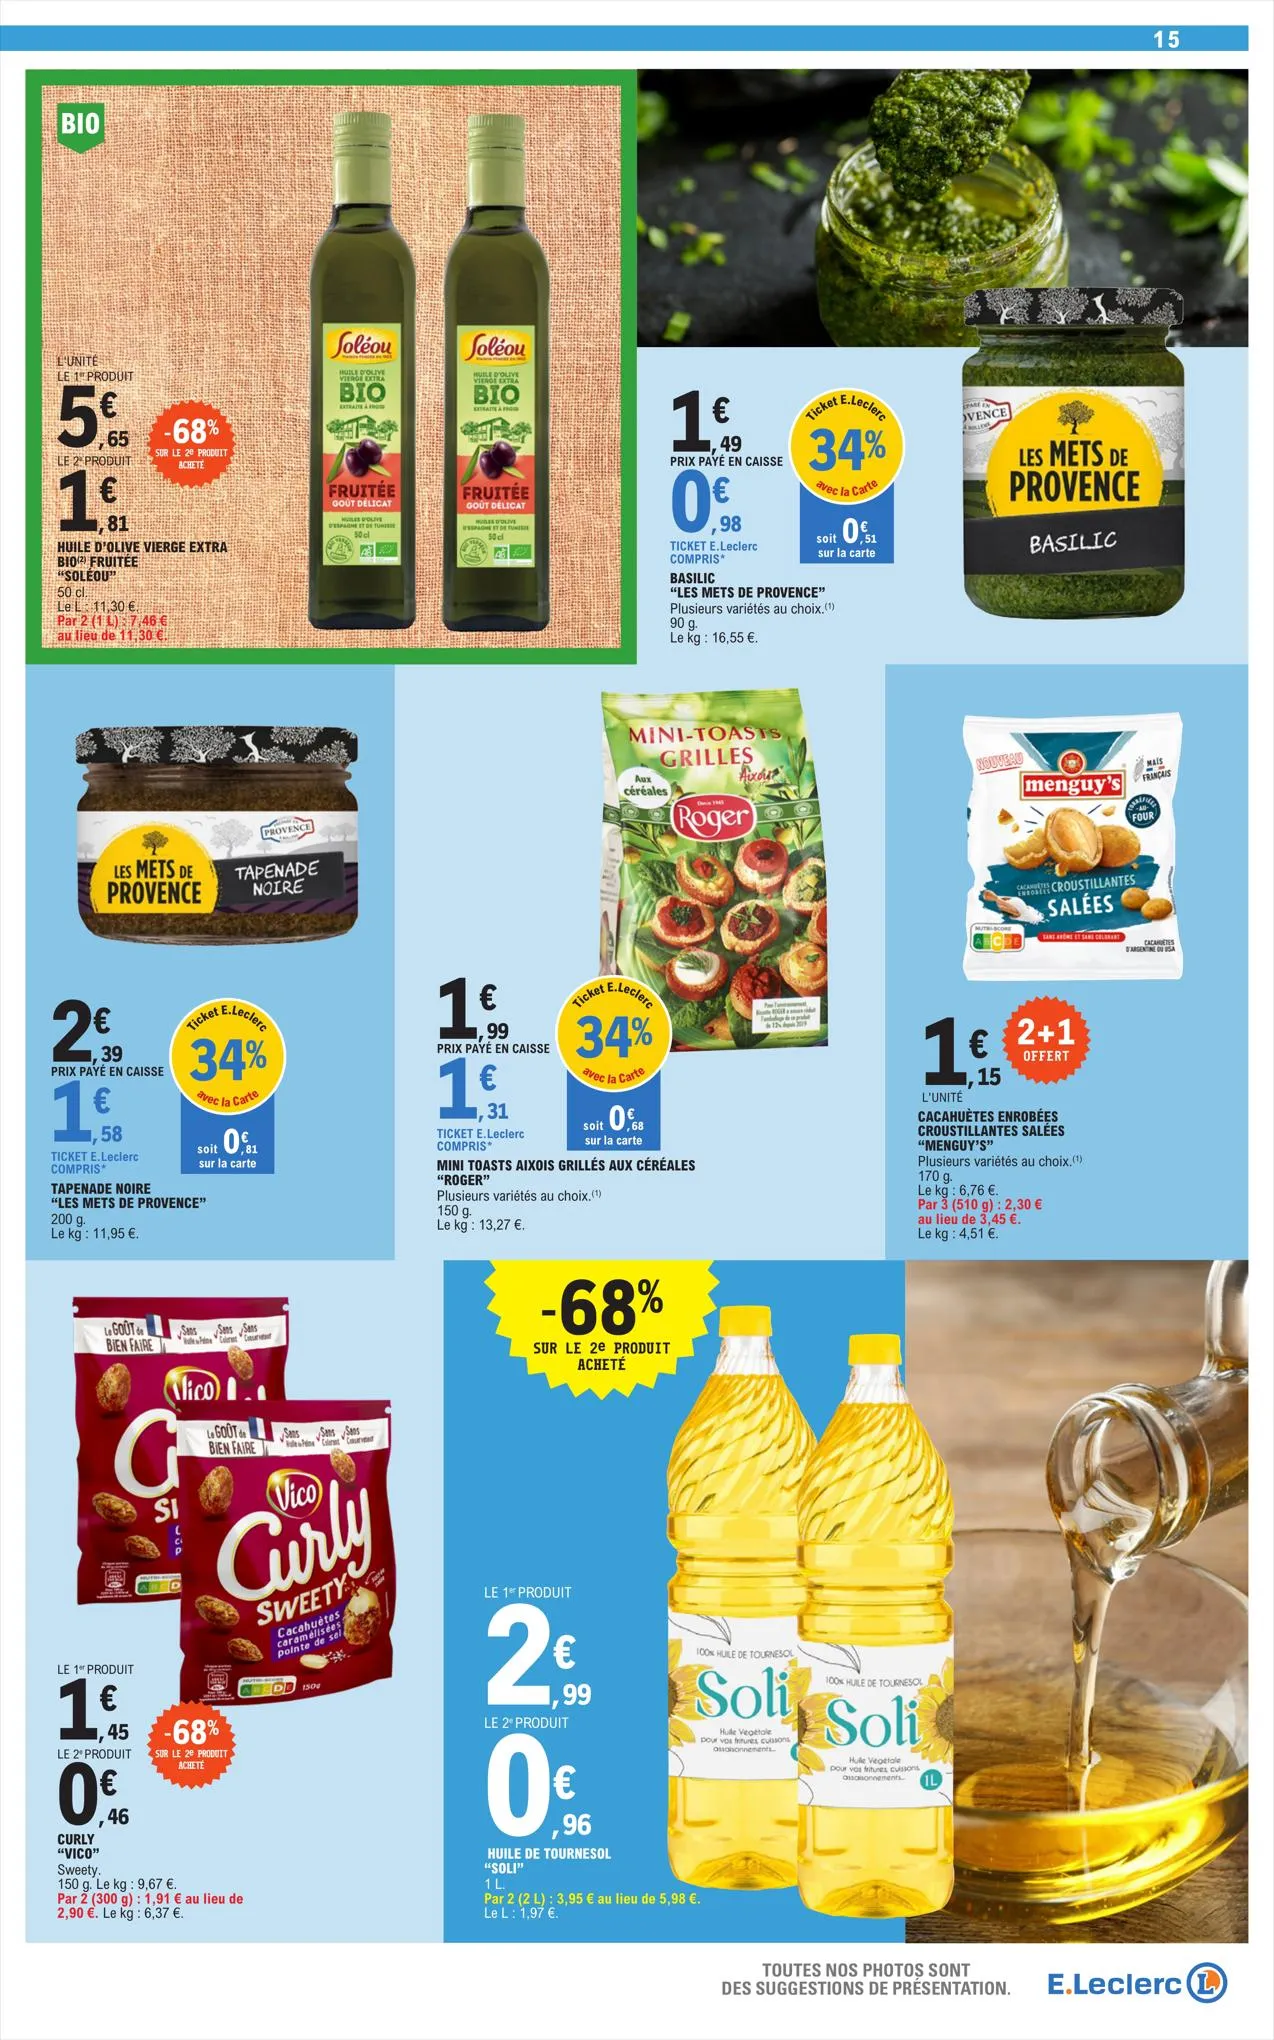 Catalogue Relance Alimentaire 11 - Mixte, page 00015